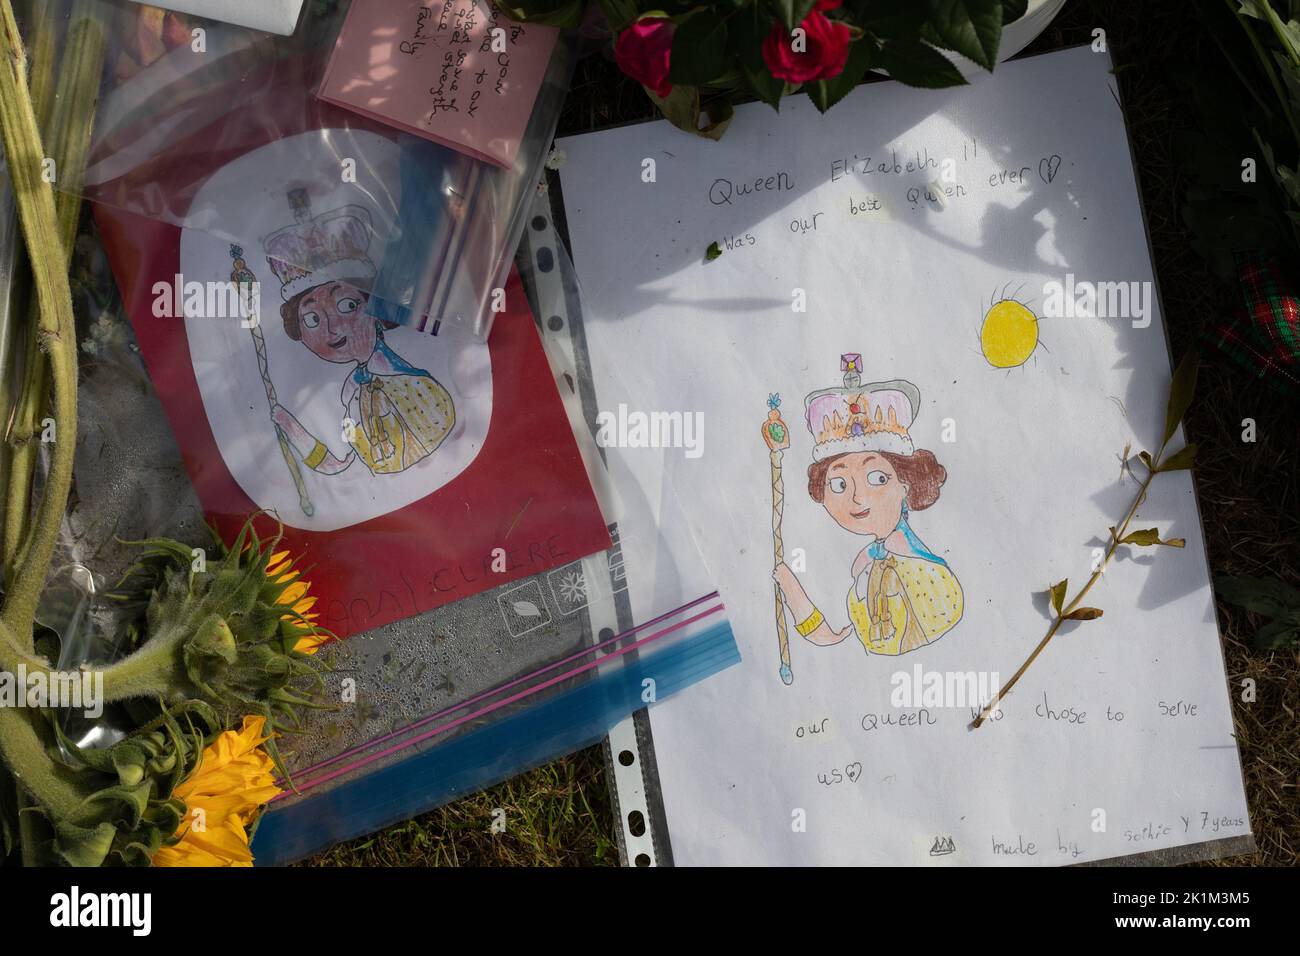 Edinburgh Scotland, 19 September 2022. Flowers, letters and gifts laid by the public as a mark of respect for Her Majesty Queen Elizabeth II who died on 8th September, in the gardens of Palace of Holyroodhouse, in Edinburgh Scotland, 19 September 2022. Photo credit: Jeremy Sutton-Hibbert/Alamy Live News. Stock Photo